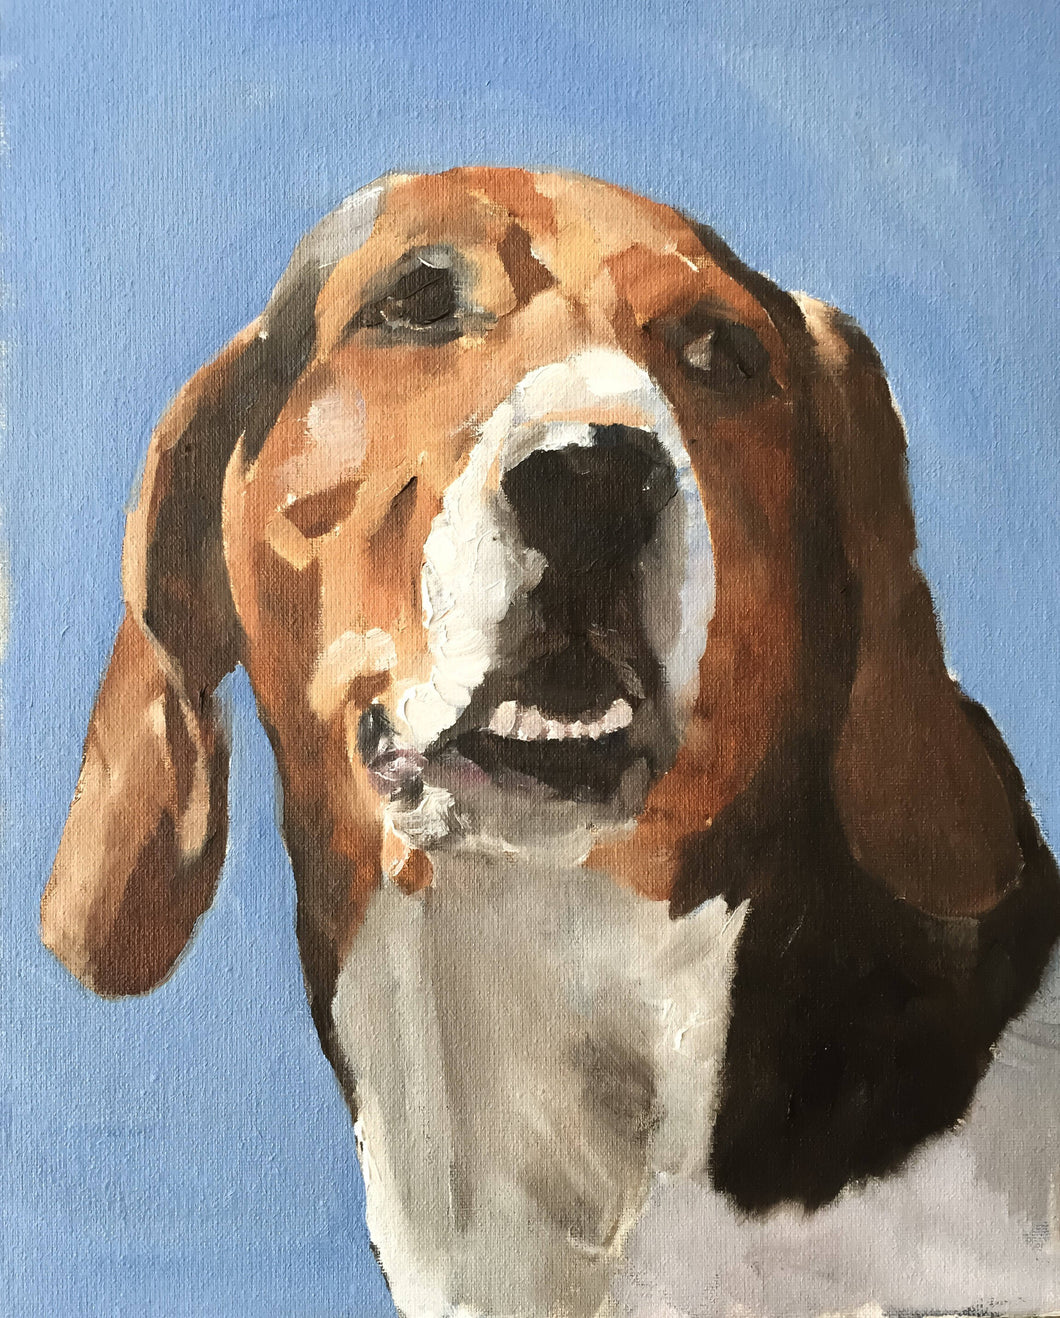 Dog Painting, Prints, Canvas, Posters, Originals, Commissions, Fine Art - from original oil painting by James Coates